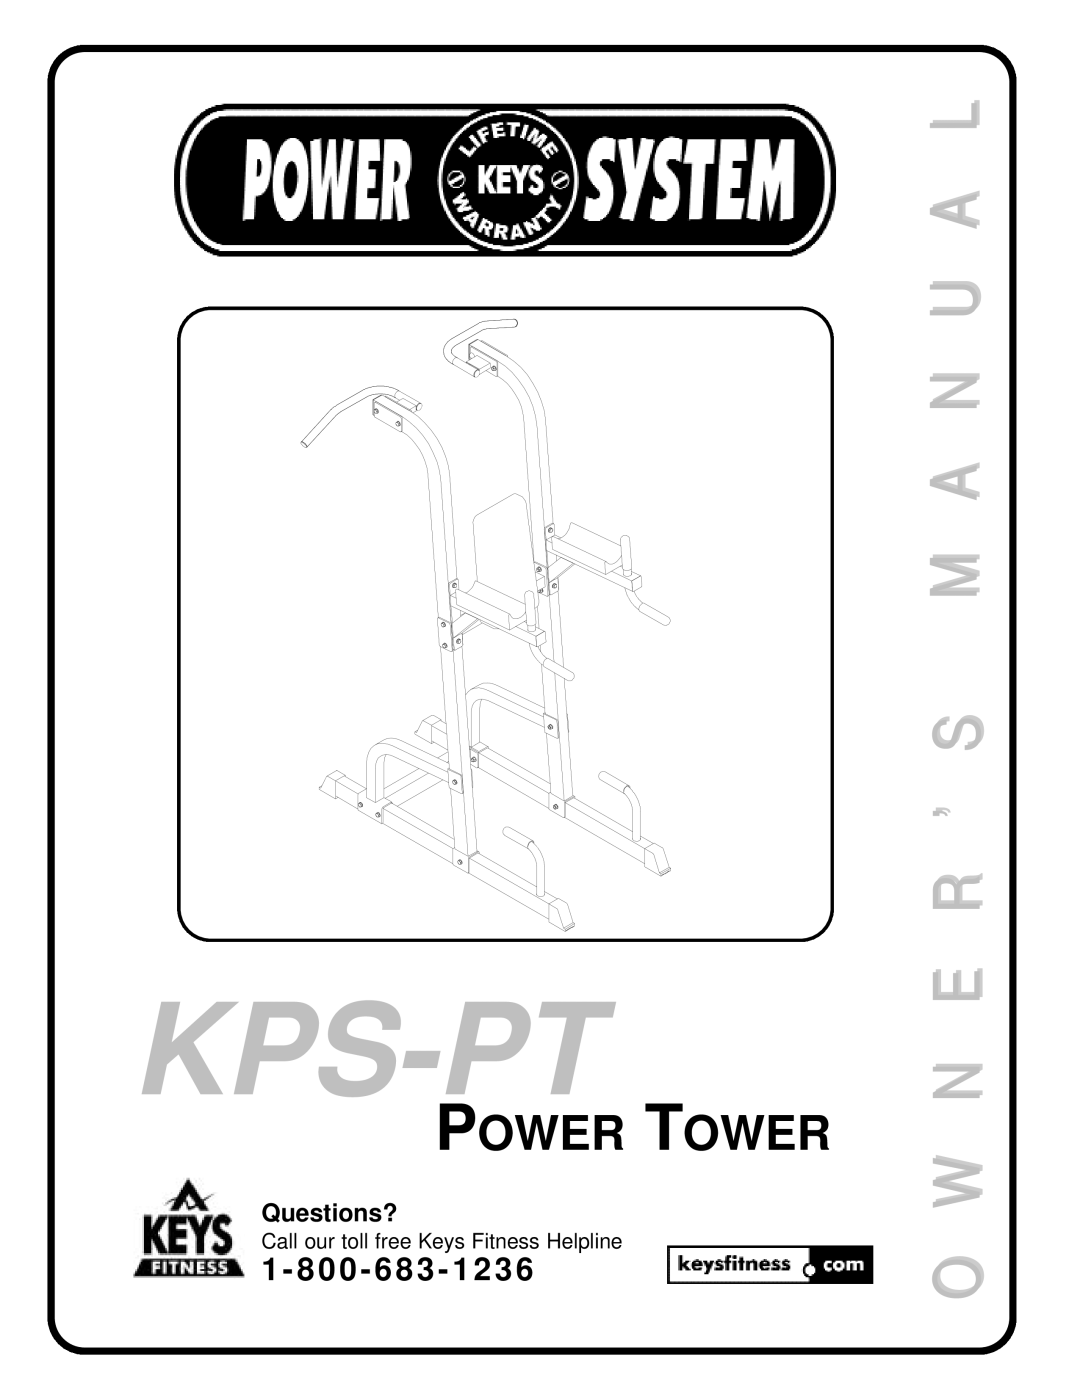 Keys Fitness KPS-PT manual Kps-Pt, M A N U A L O W N E R ’ S, Power Tower, Questions? 